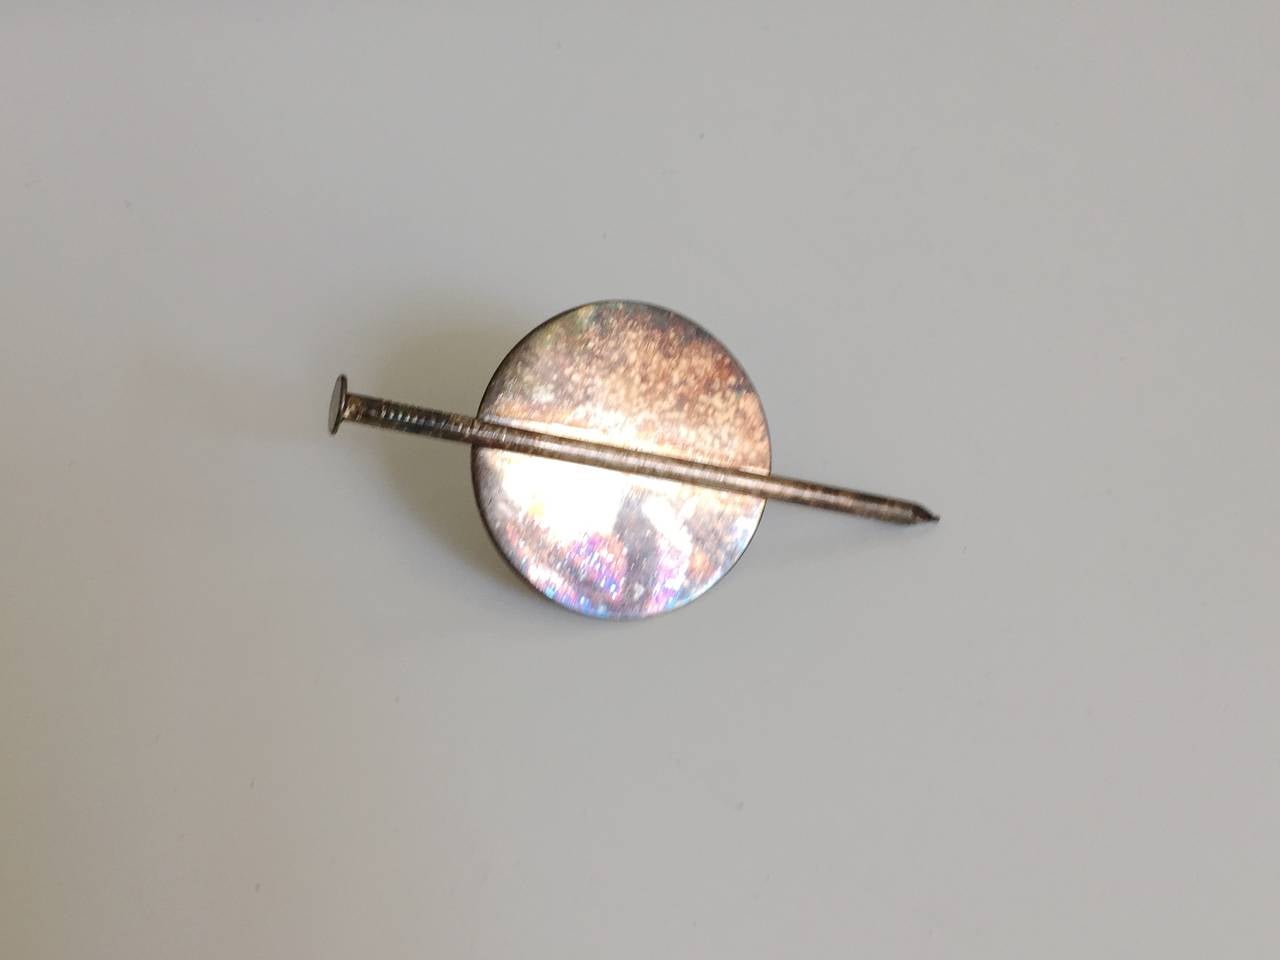 Patrick Kelly Paris 1988 silver nail clip on earring from the private collection of long time friend & model Carol Martin of Atlanta. This is from Patrick Kelly's 1988 fall / winter show where he designed many fabulous pieces using the 'nail'